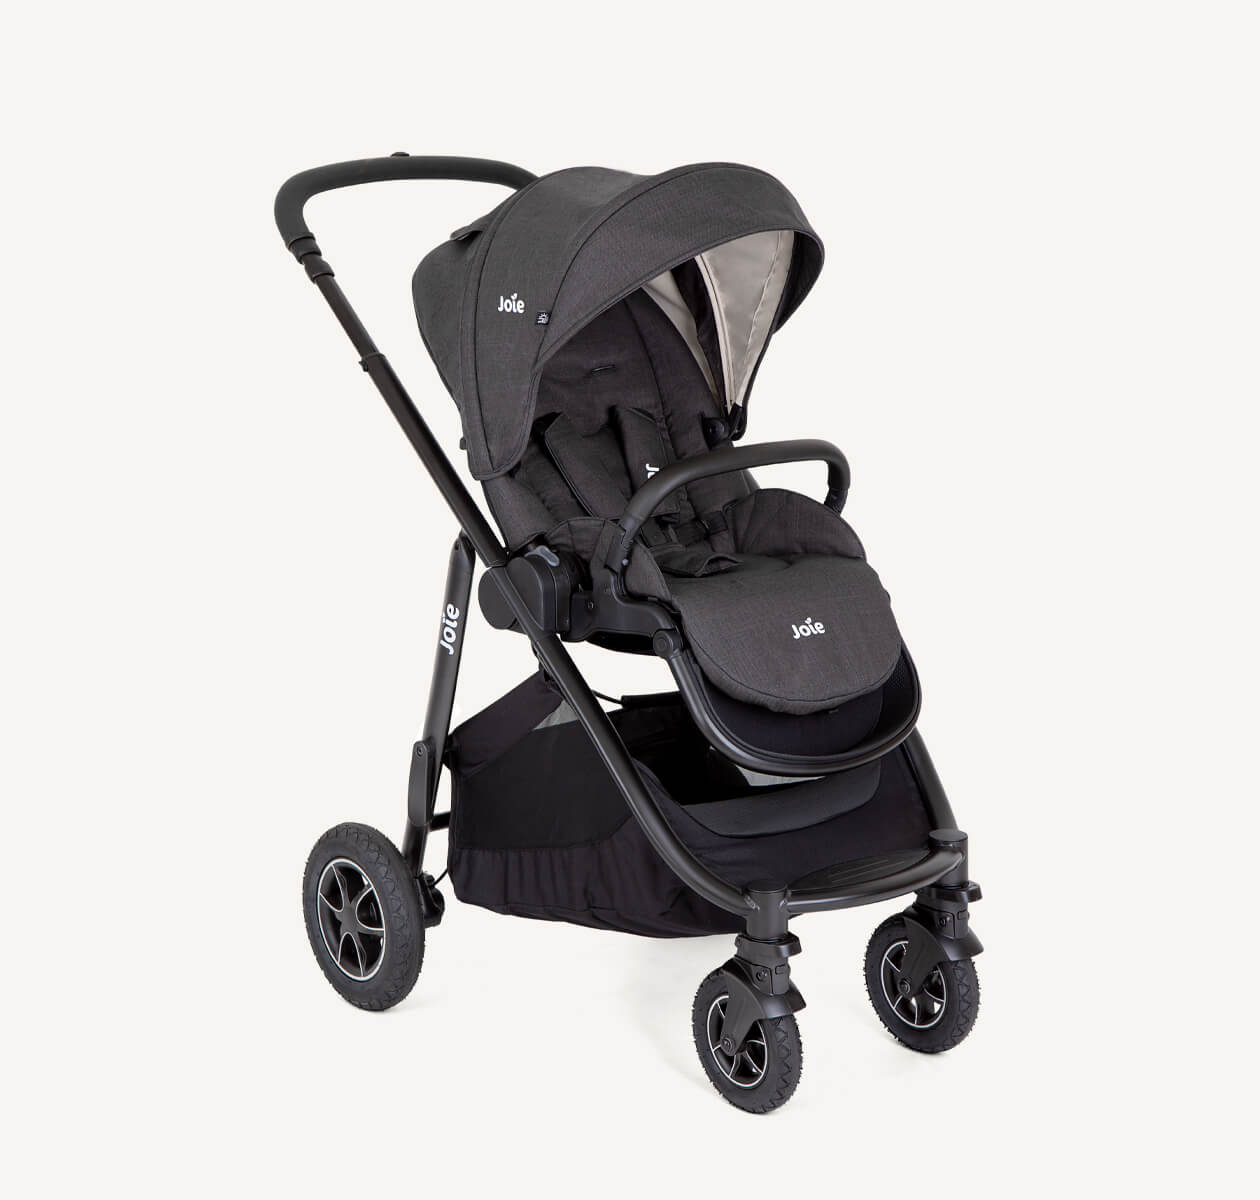 Joie Versatrax 3in1 Travel System-Shale including I-Snug Car Seat & Isofix base